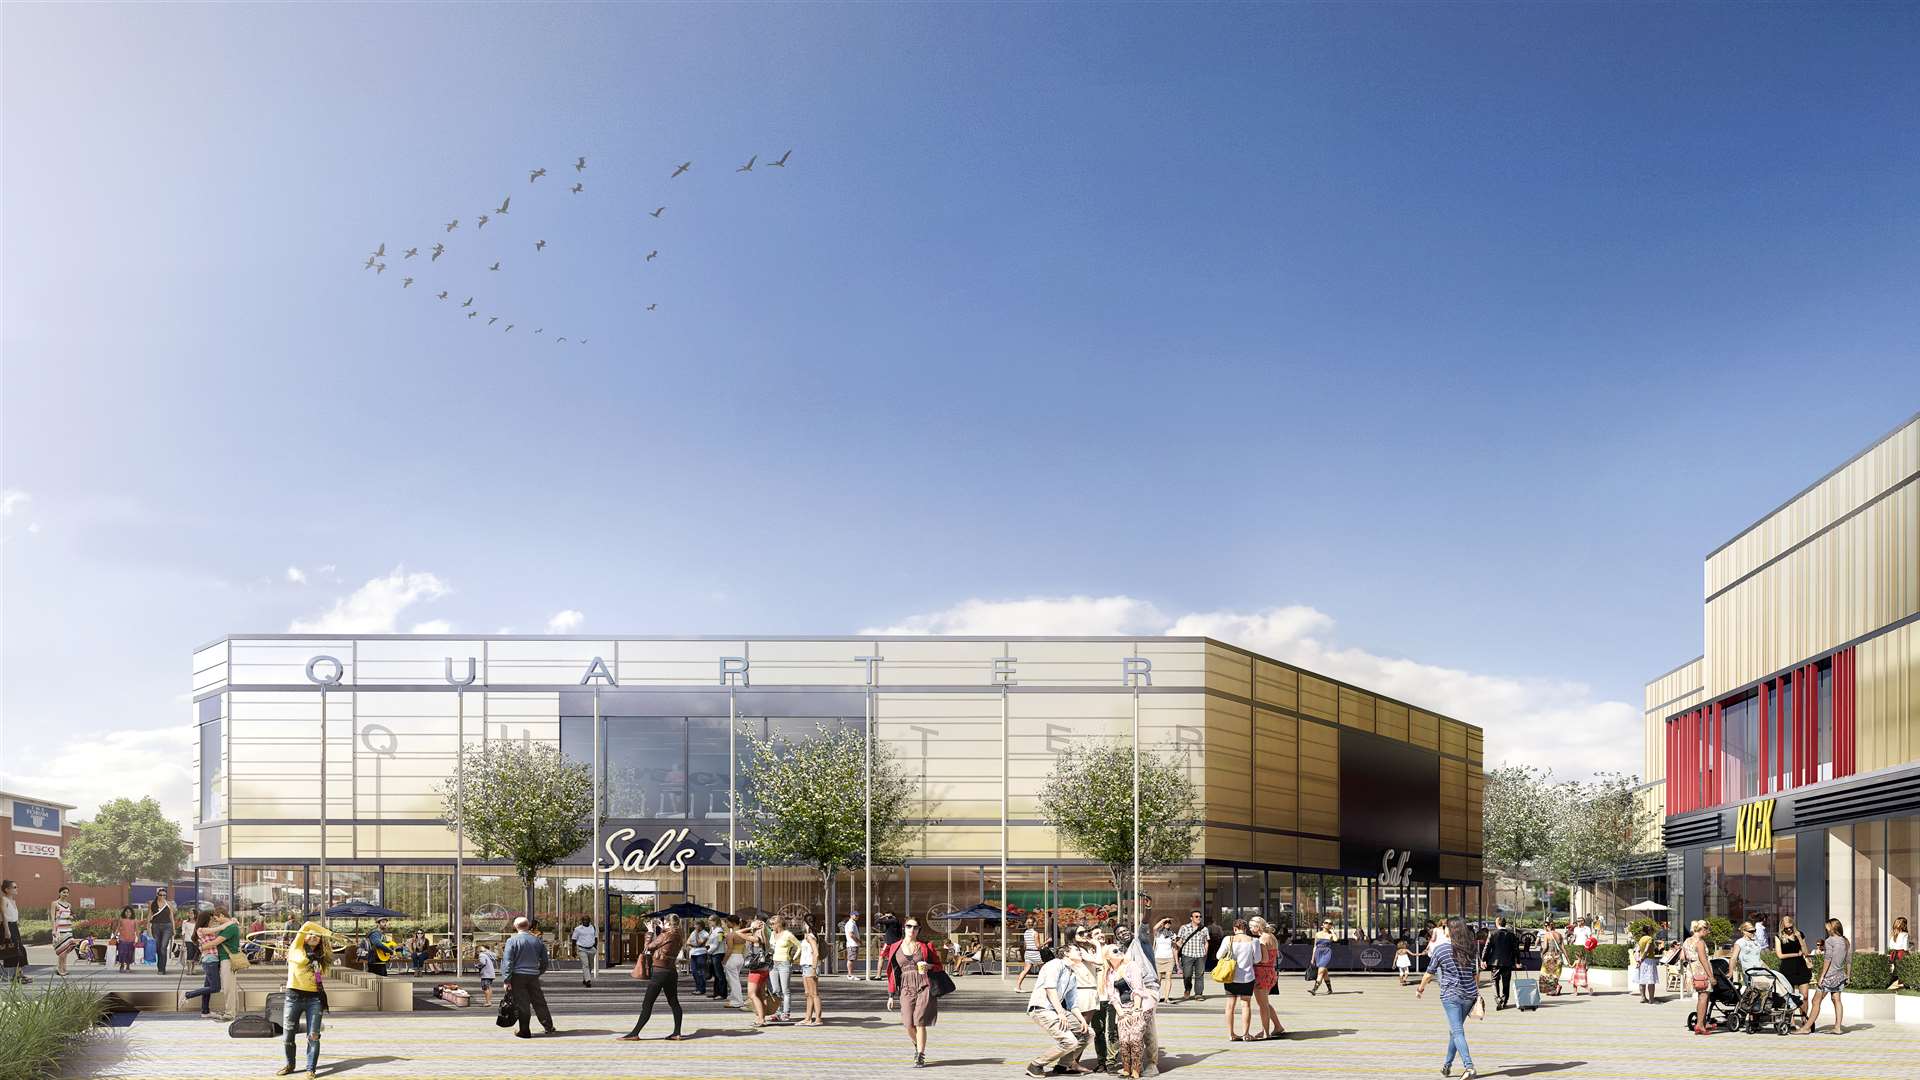 An artists' impression of the leisure quarter, with the Forum shopping centre in the distance on the left